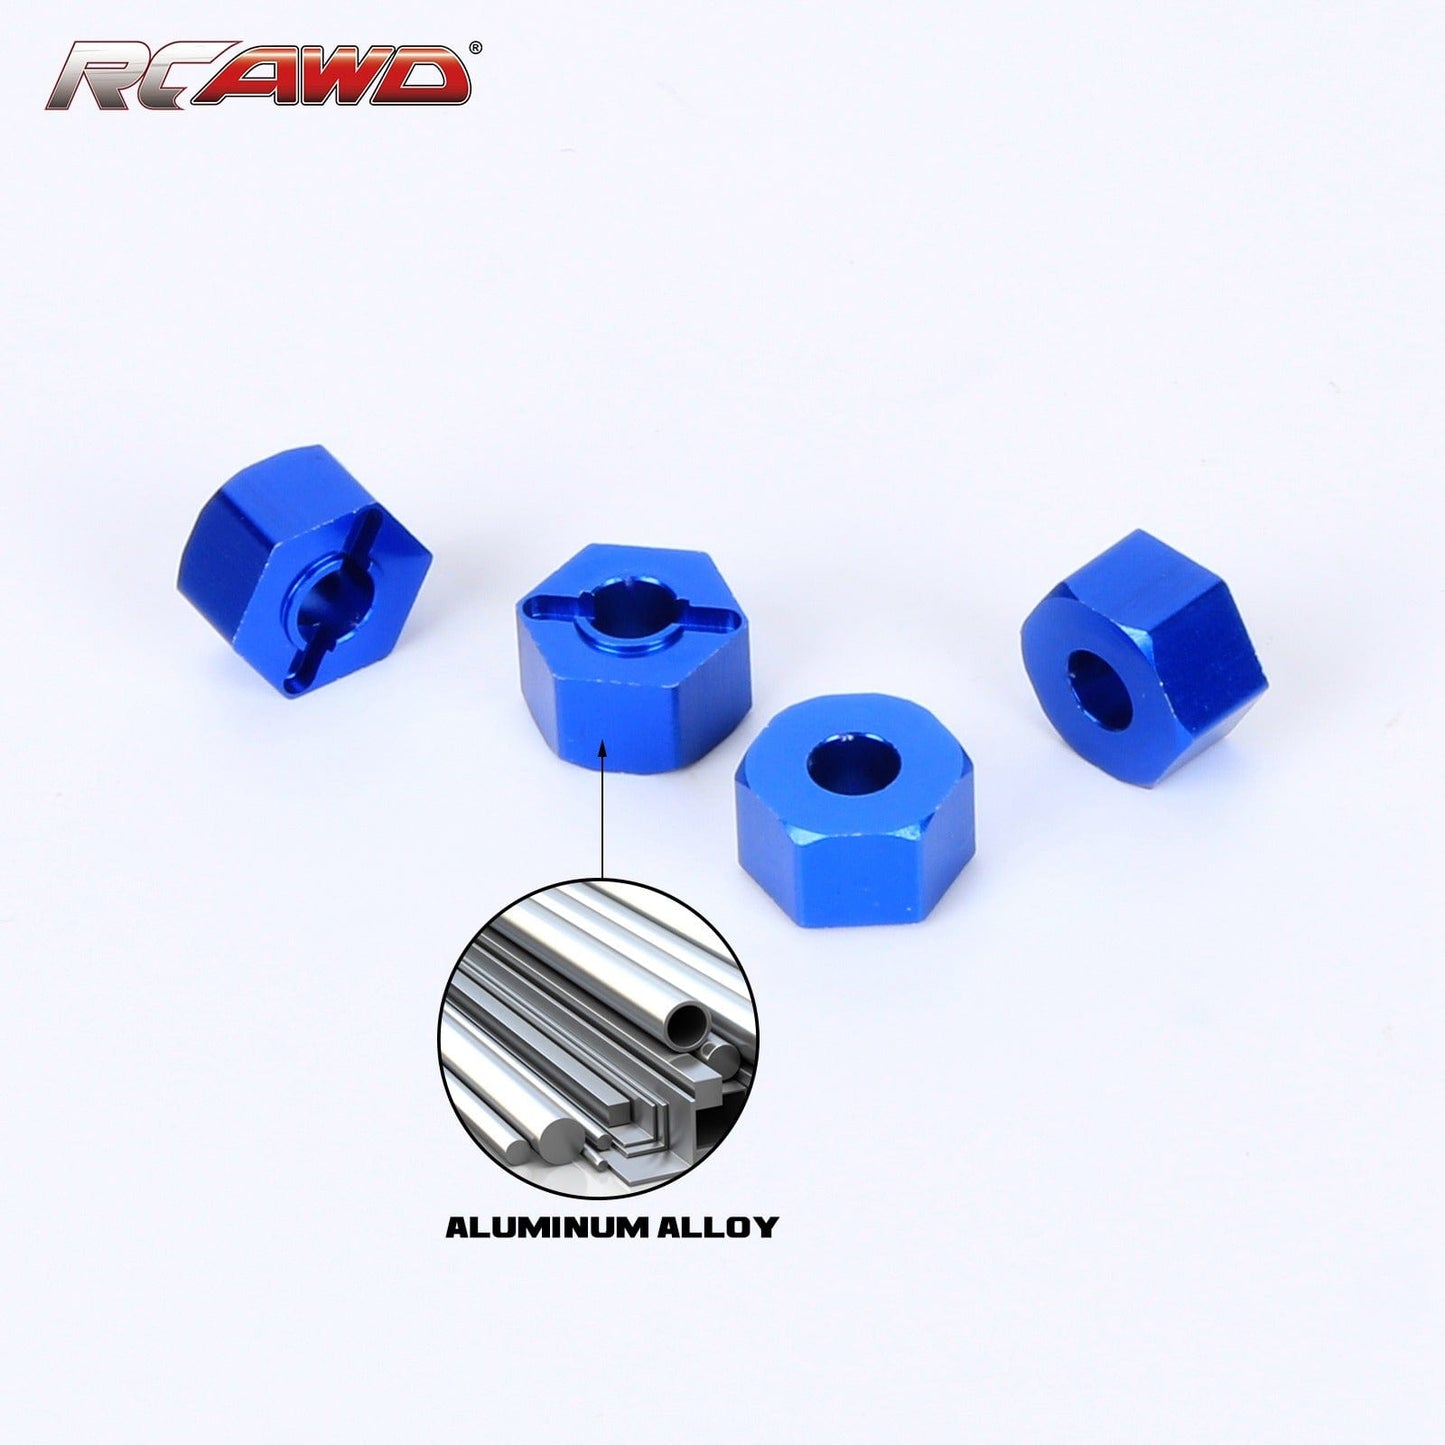 RCAWD RC 7mm Wheel Hubs 4pc for 1/10 Traxxas Slash 4wd Upgrades - RCAWD